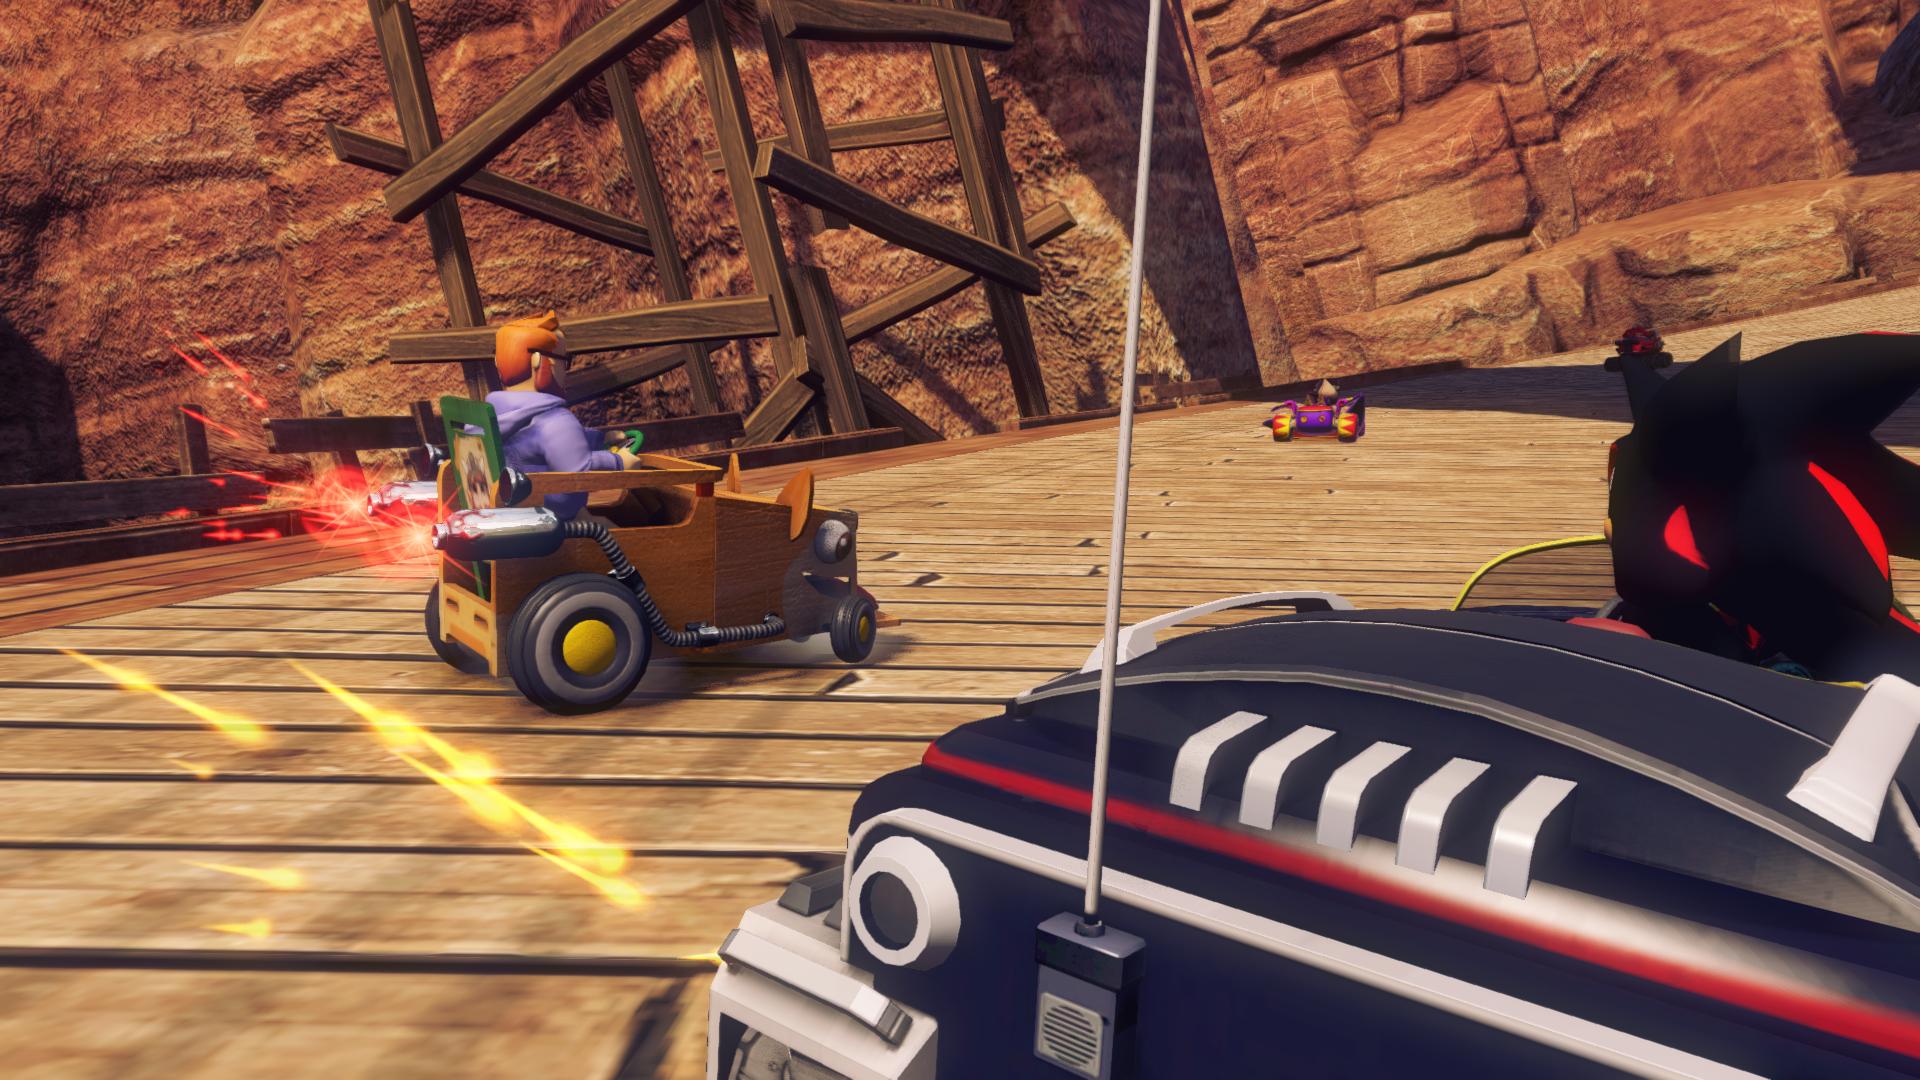 Sonic and All-Stars Racing Transformed - Yogscast DLC Steam Gift 51.92 USD